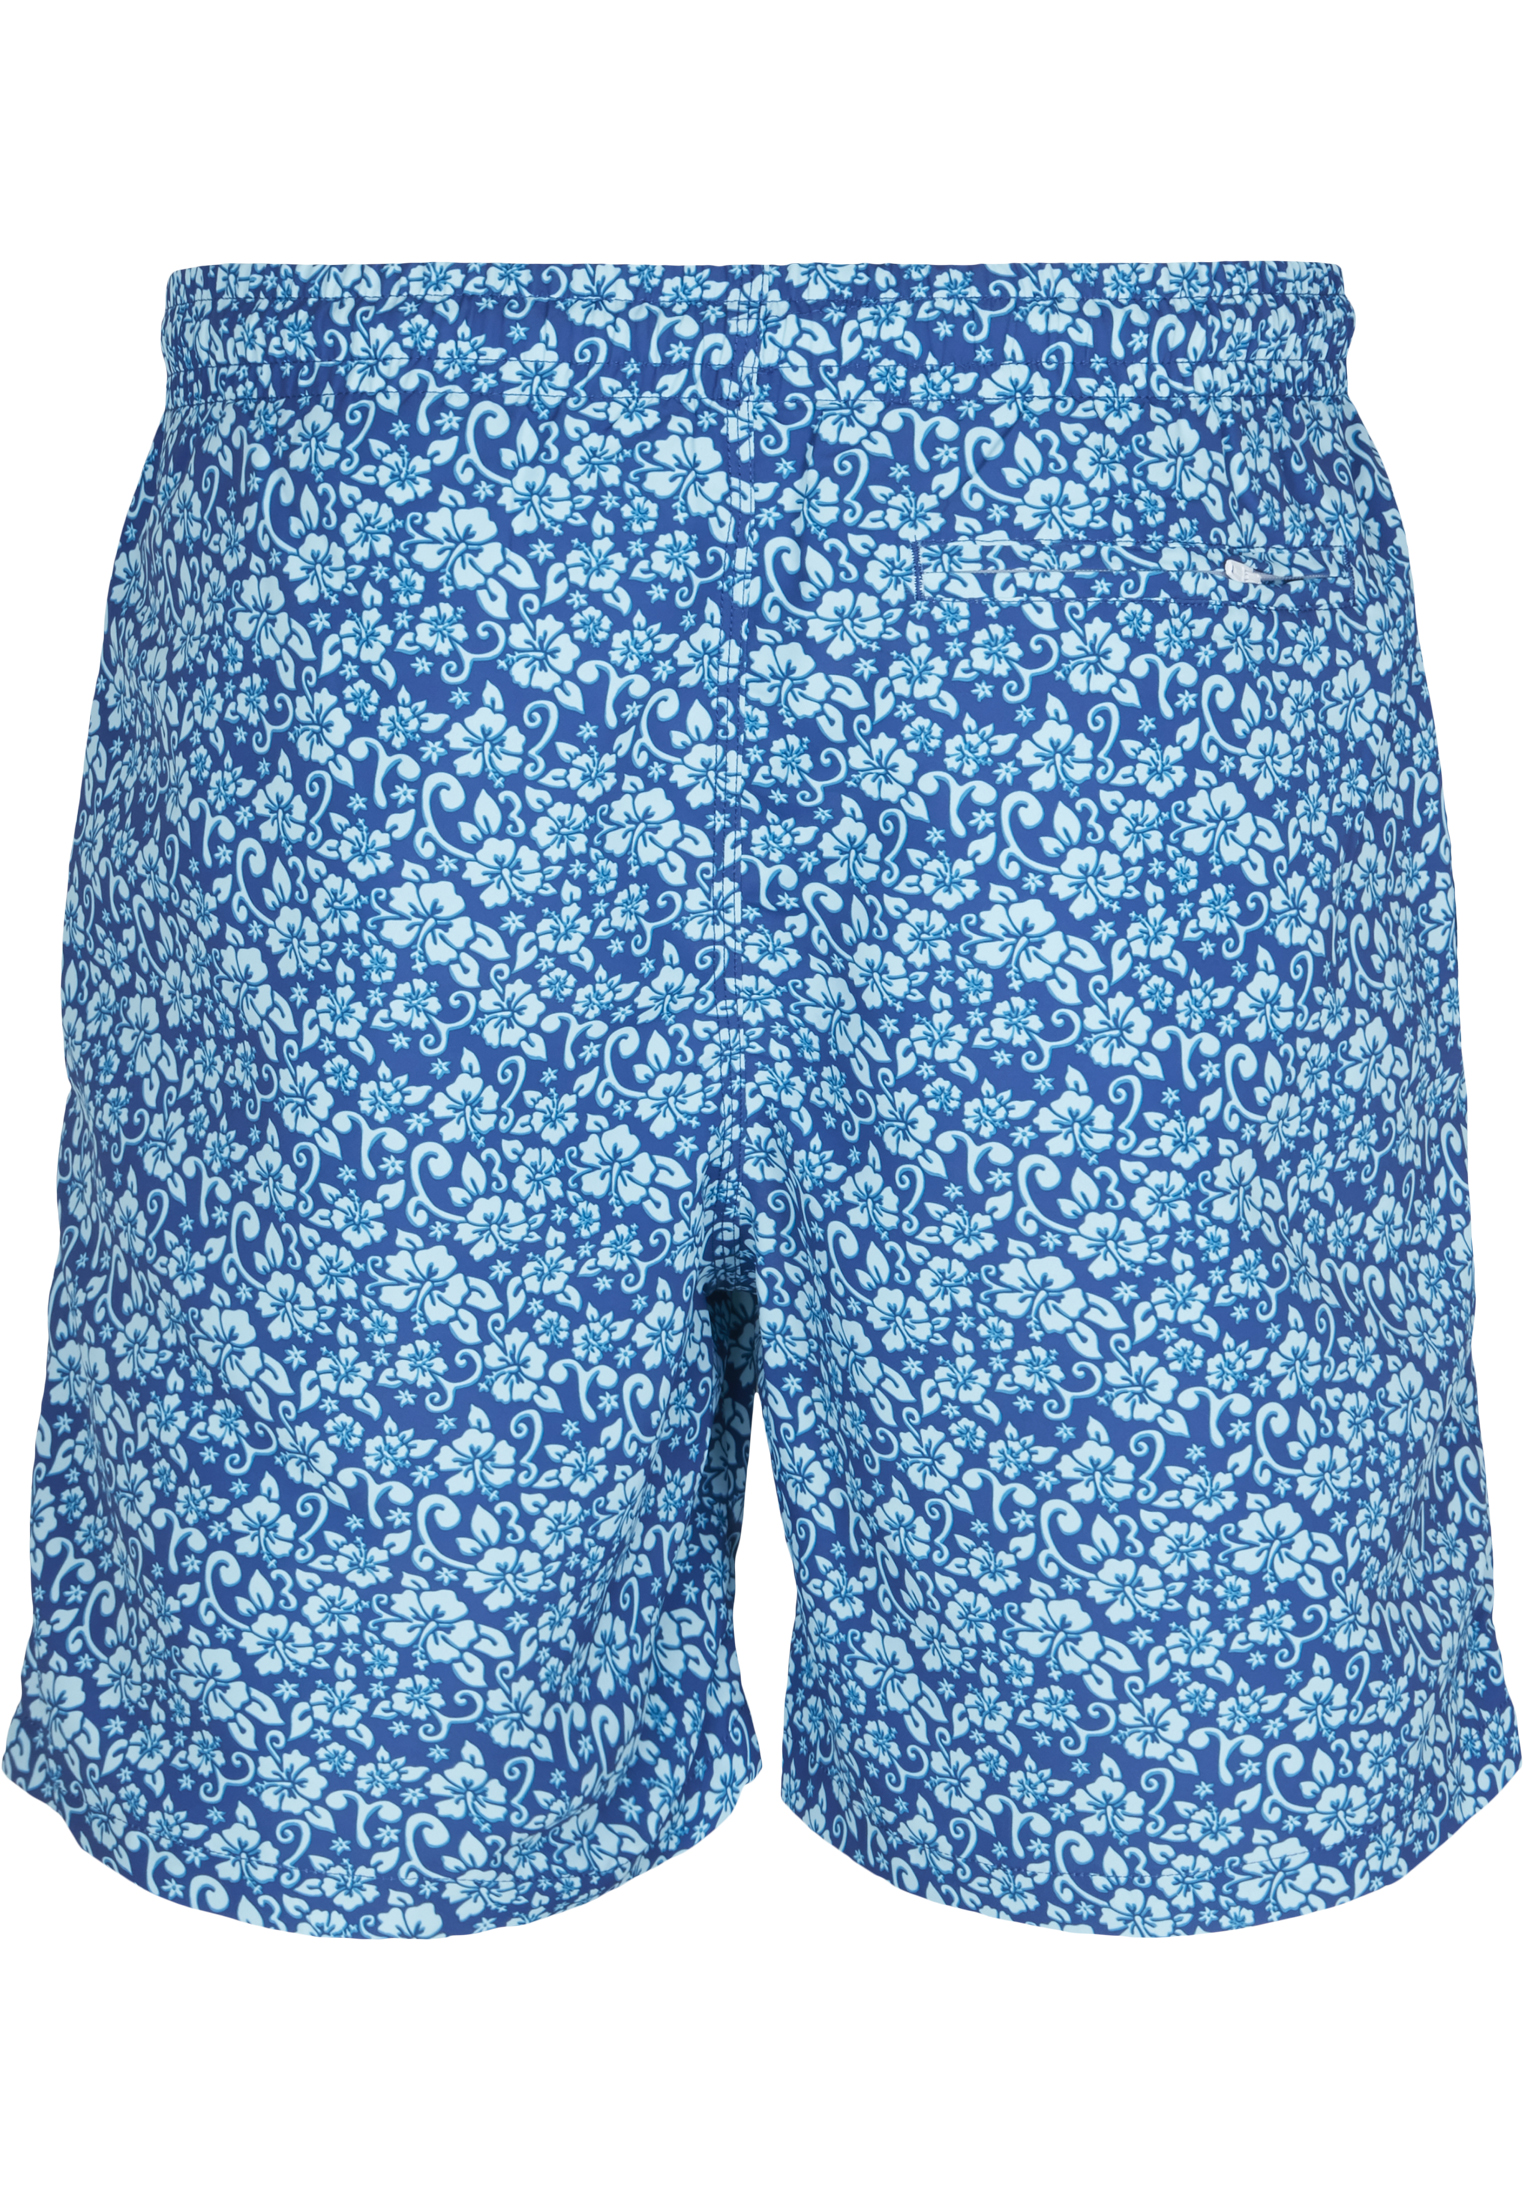 Bademode Floral Swim Shorts in Farbe navy